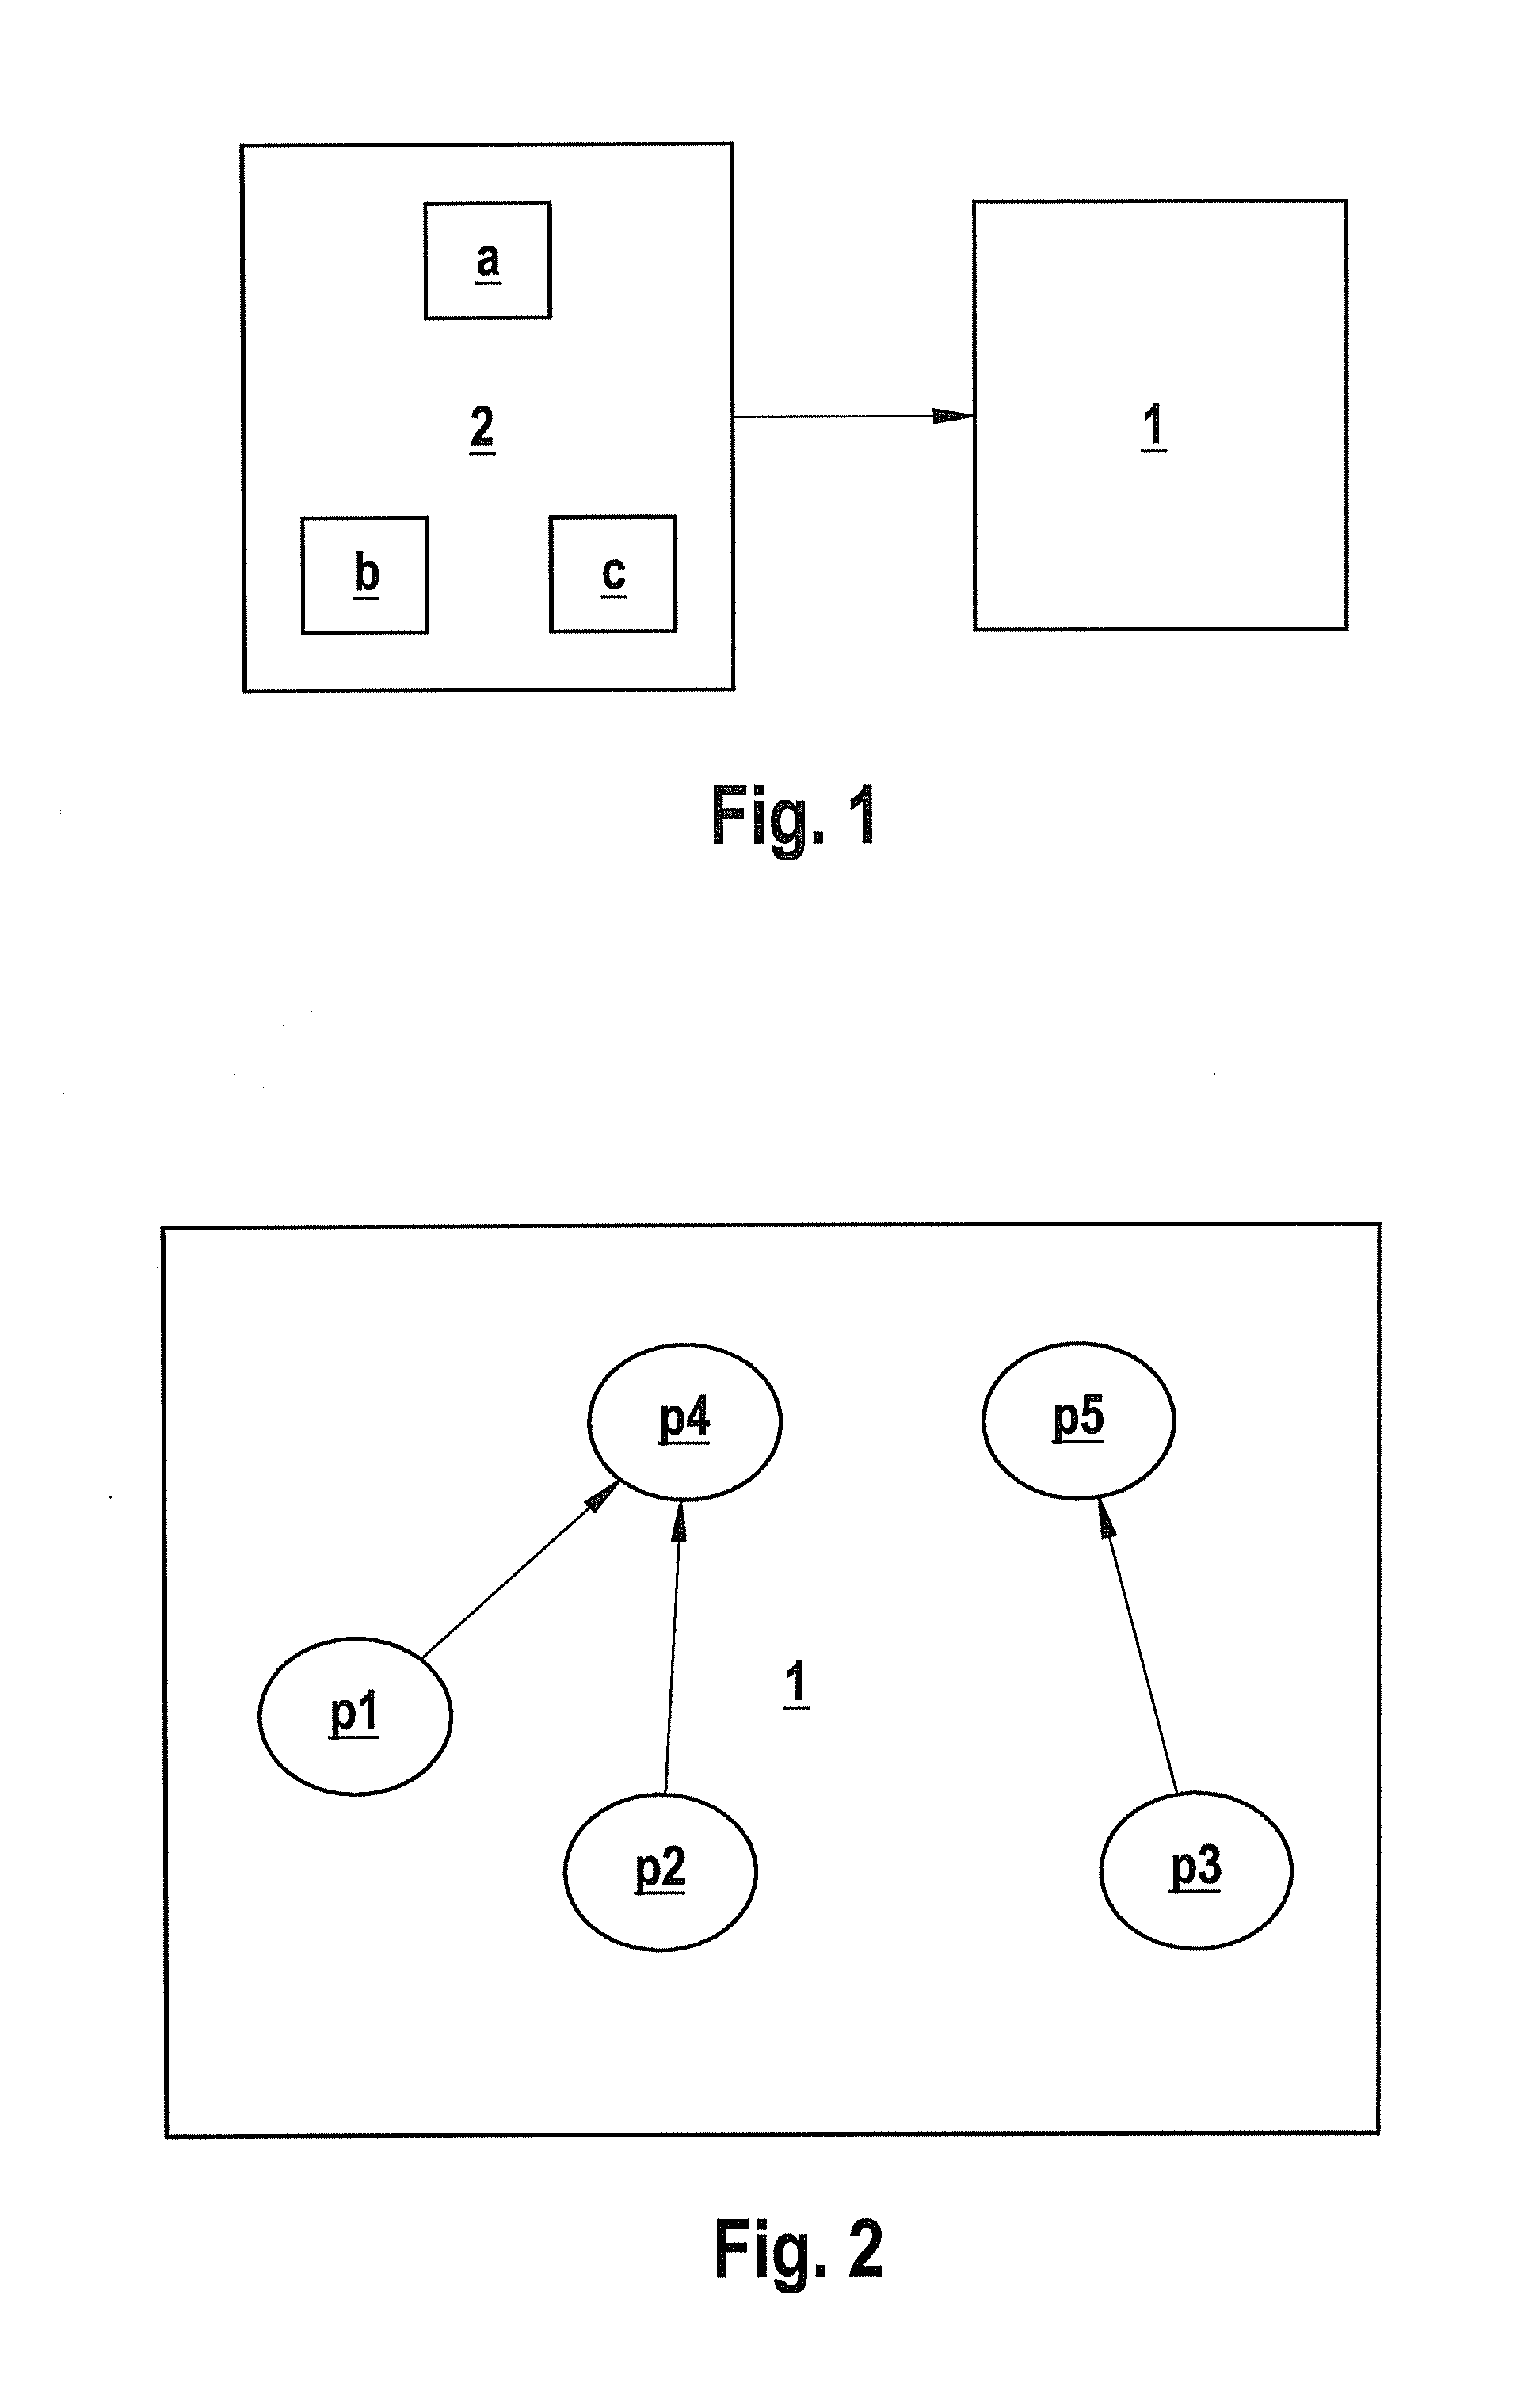 Method for updating a database